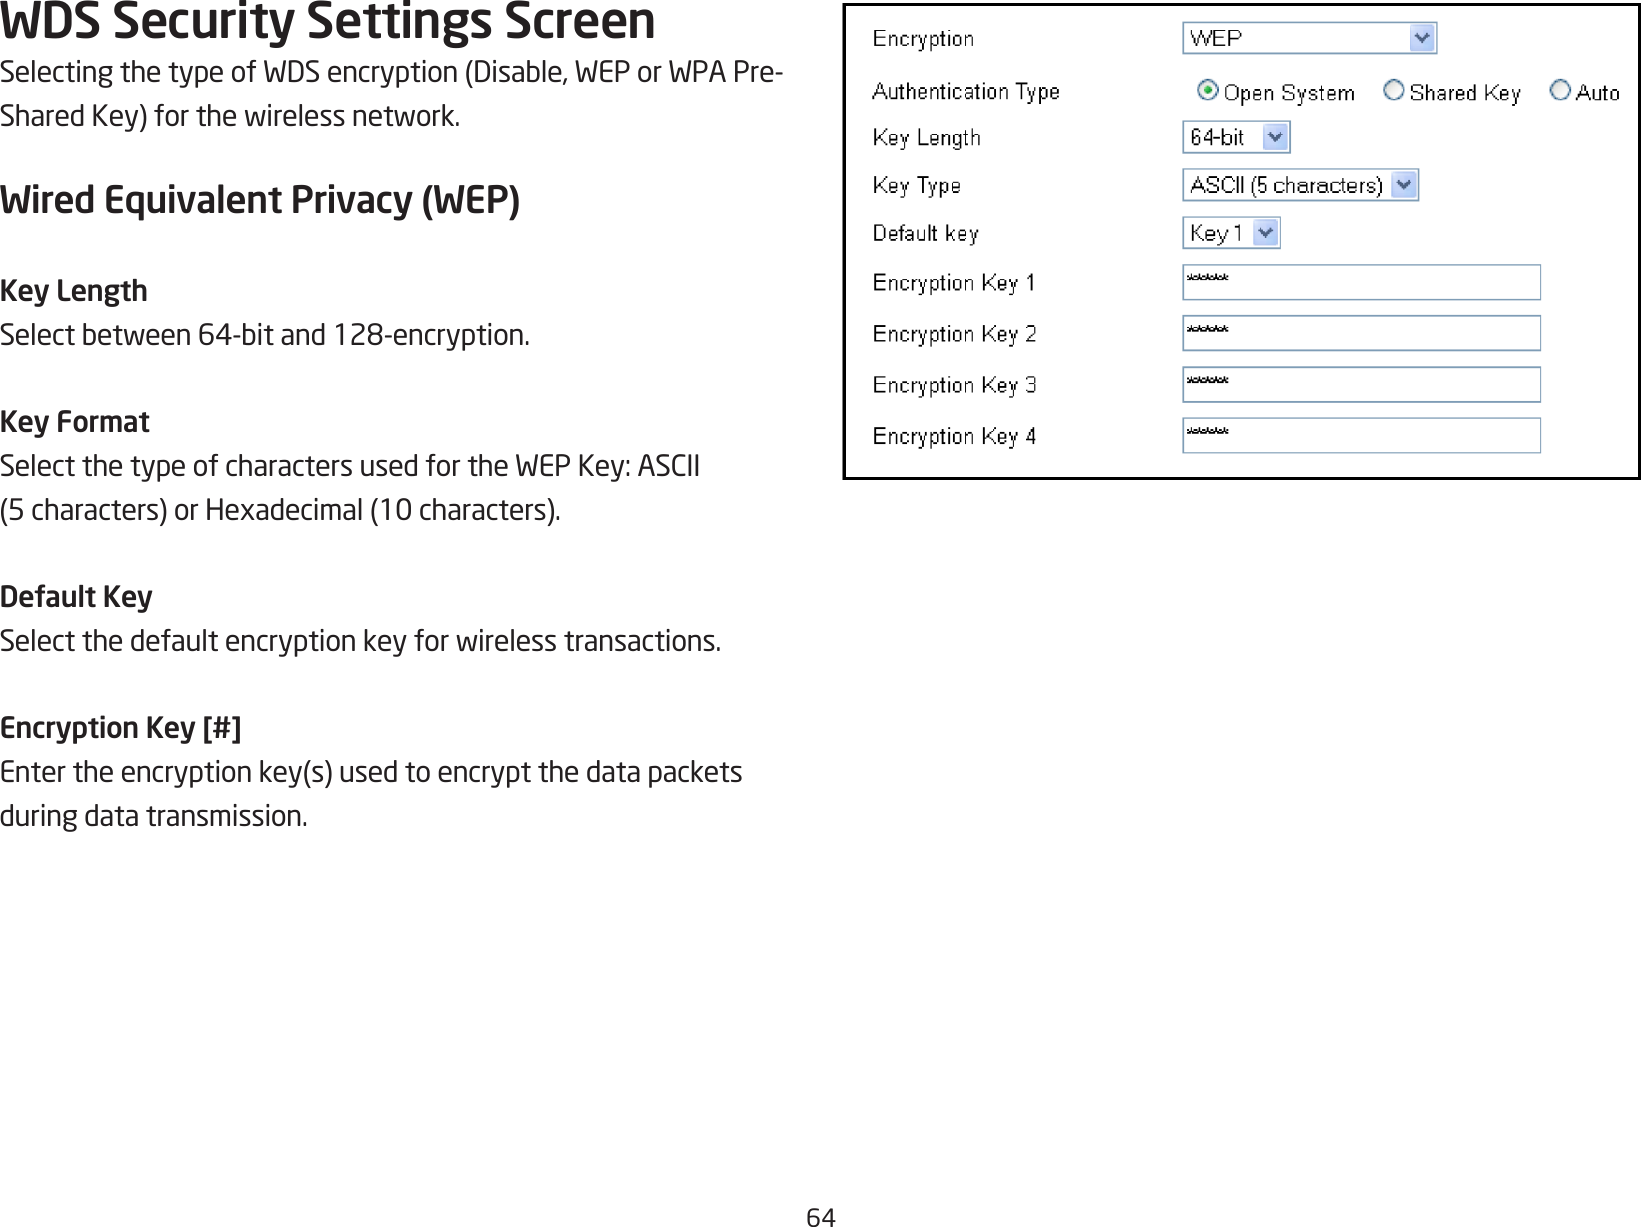 64WDS Security Settings ScreenSelectingthetypeofWDSencryption(Disable,WEPorWPAPre-SharedKey)forthewirelessnetwork.Wired Equivalent Privacy (WEP)Key LengthSelectbetween64-bitand128-encryption.Key FormatSelectthetypeofcharactersusedfortheWEPKey:ASCII(5characters)orHexadecimal(10characters).Default KeySelectthedefaultencryptionkeyforwirelesstransactions.Encryption Key [#]Entertheencryptionkey(s)usedtoencryptthedatapacketsduring data transmission.